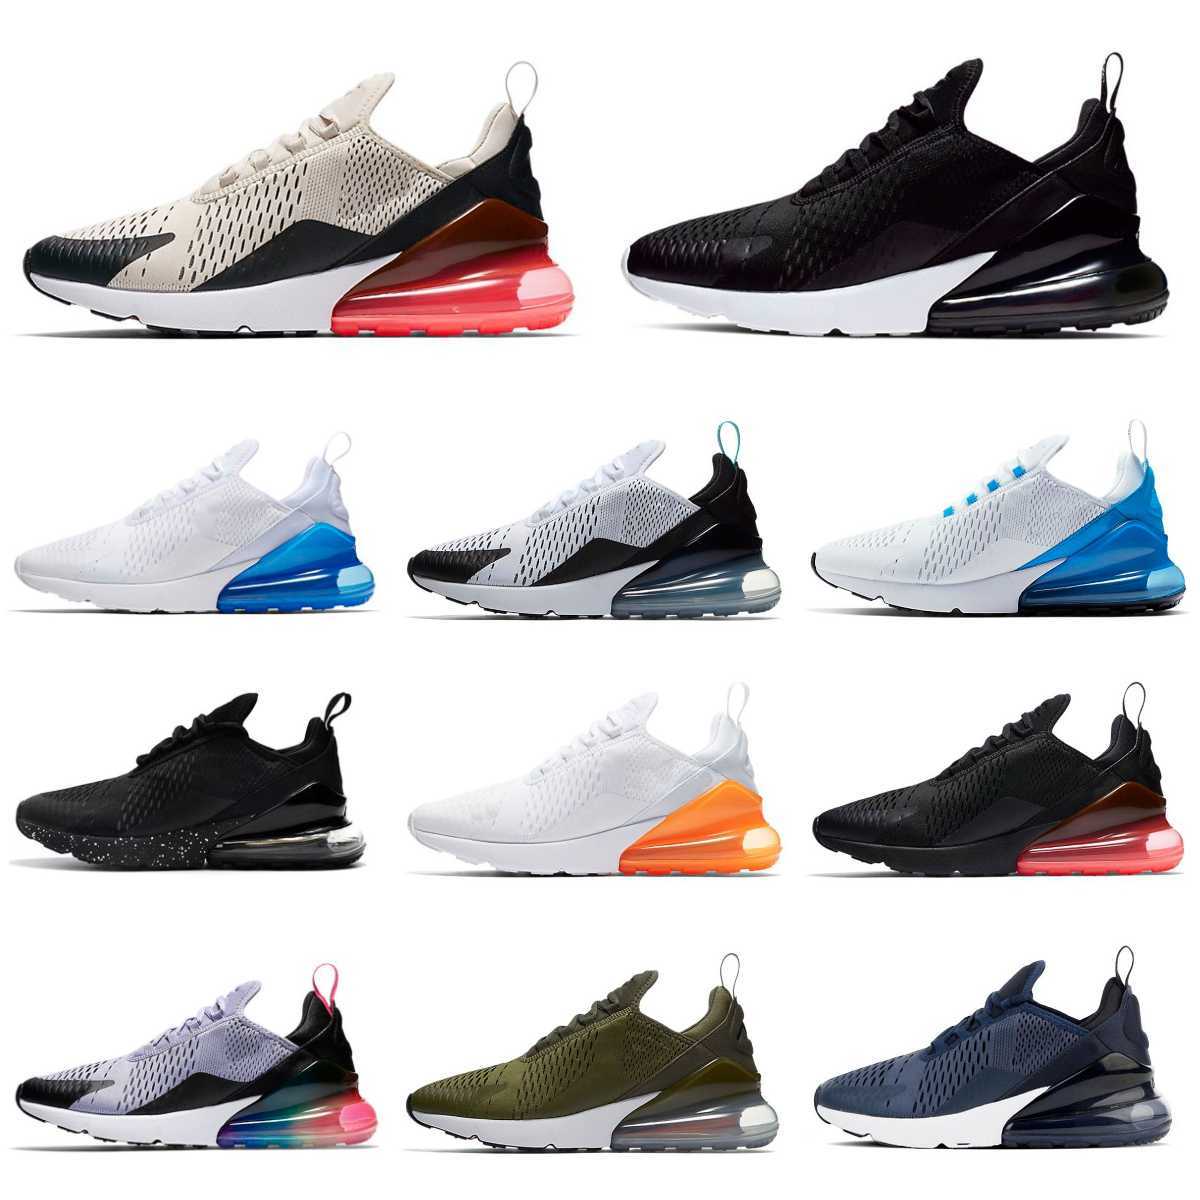 

Trainers Max 270 270s Men Women Running Shoes AirMaXs Triple Black White Dusty Cactus Designers Multi University Red Brown Barely Rose Tea Berry Sports Sneakers S8, Please contact us